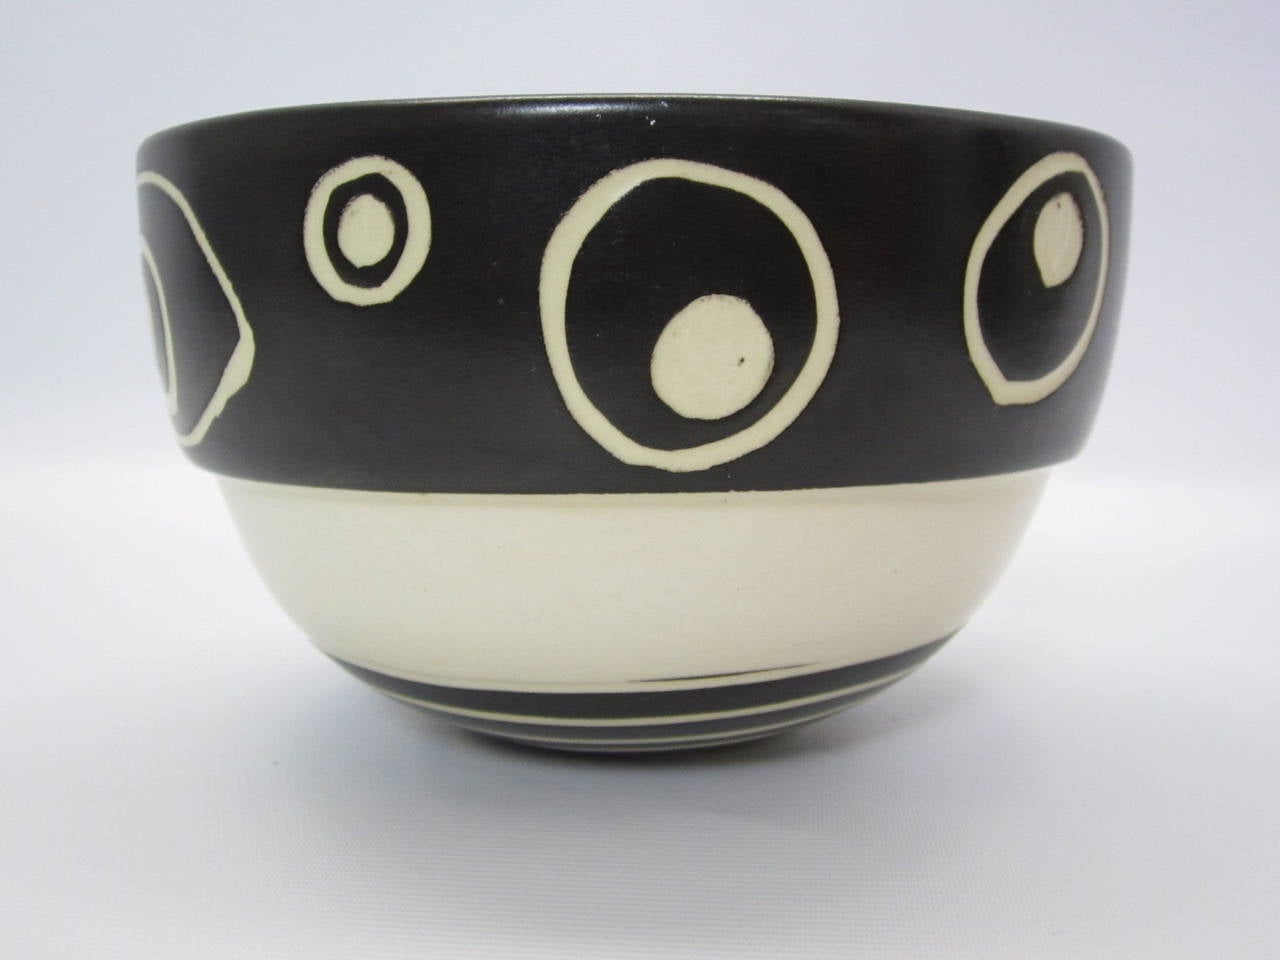 Ken Edwards Mexican pottery bowl. A diminutive bowl with black and white spiral design from his 1991 collection. Signed and dated 1991.